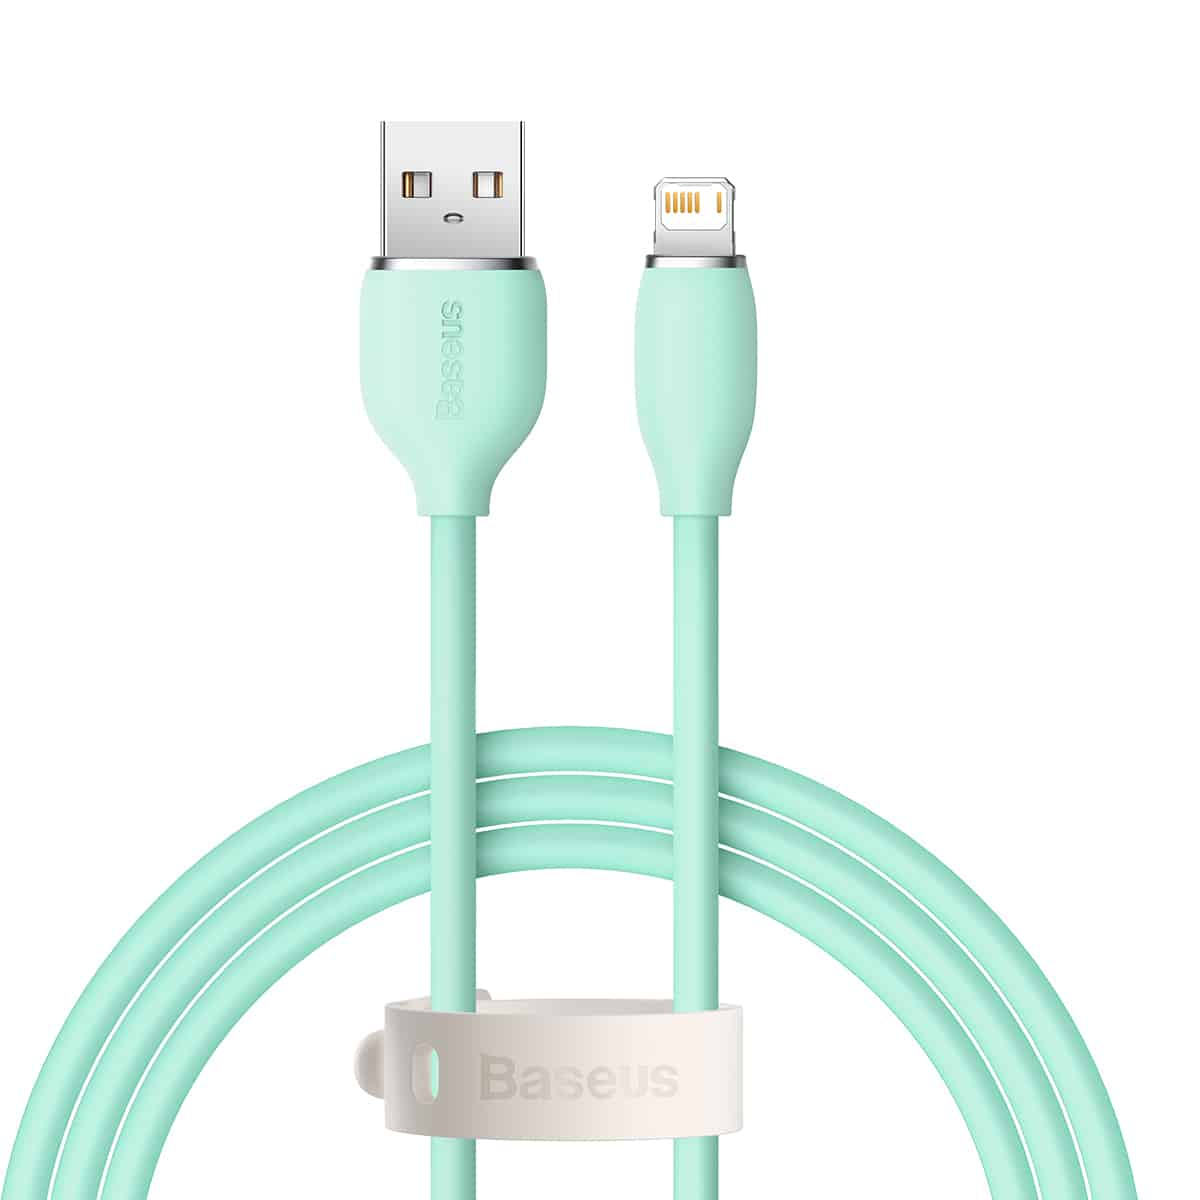 BASEUS JELLY LIQUID SILICA GEL FAST CHARGING DATA CABLE USB TO IPHONE 2.4A 1.2M - Green